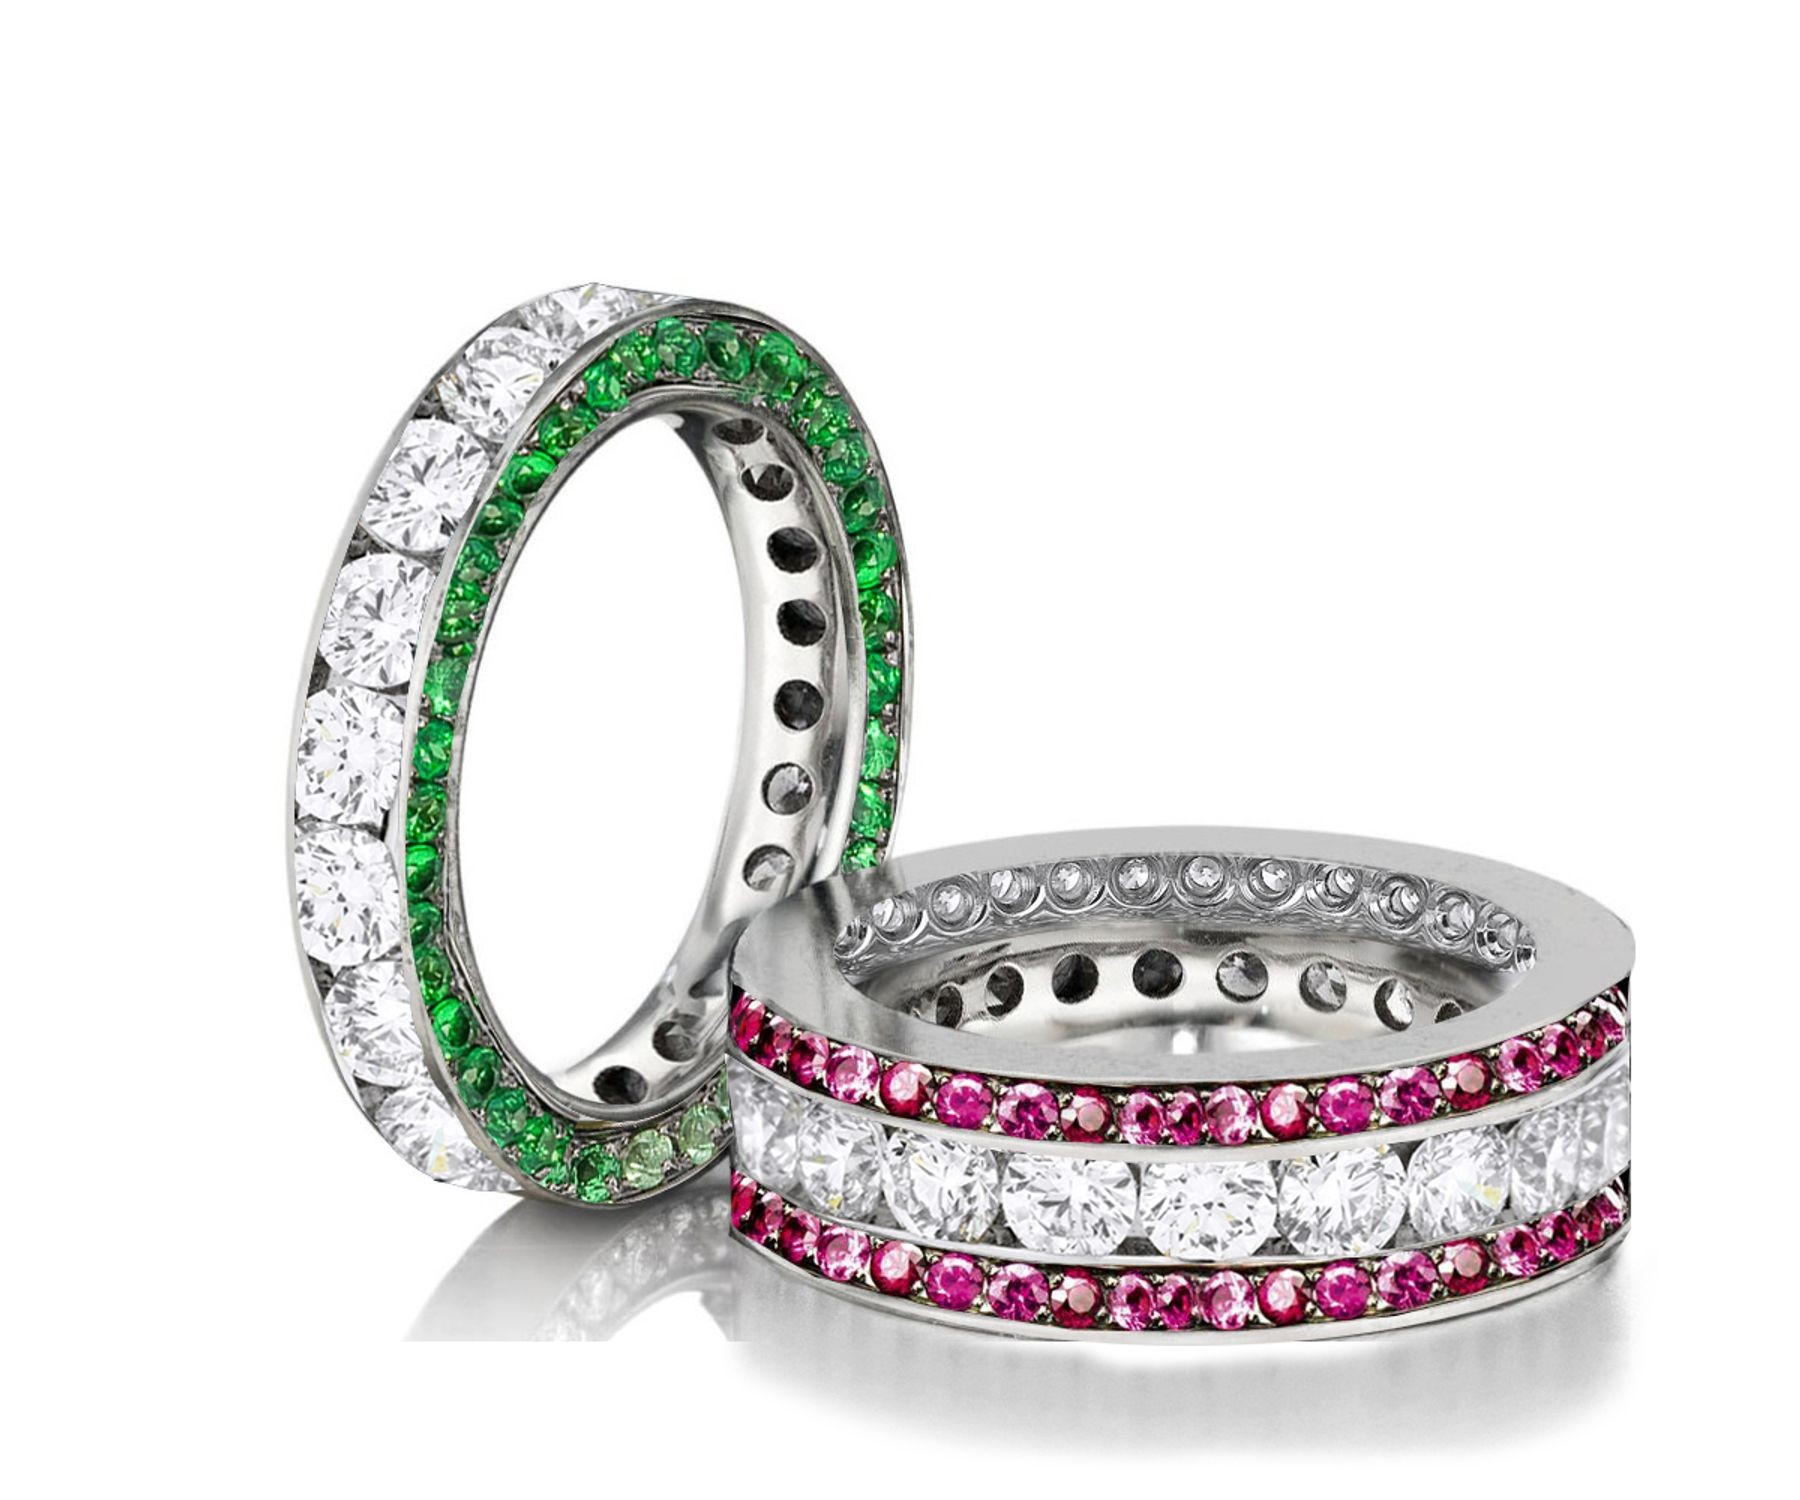 Made to Order Channel Set Brilliant Cut Round Diamonds, Emeralds & Pink Sapphires Set Eternity Rings & Stackable Bands